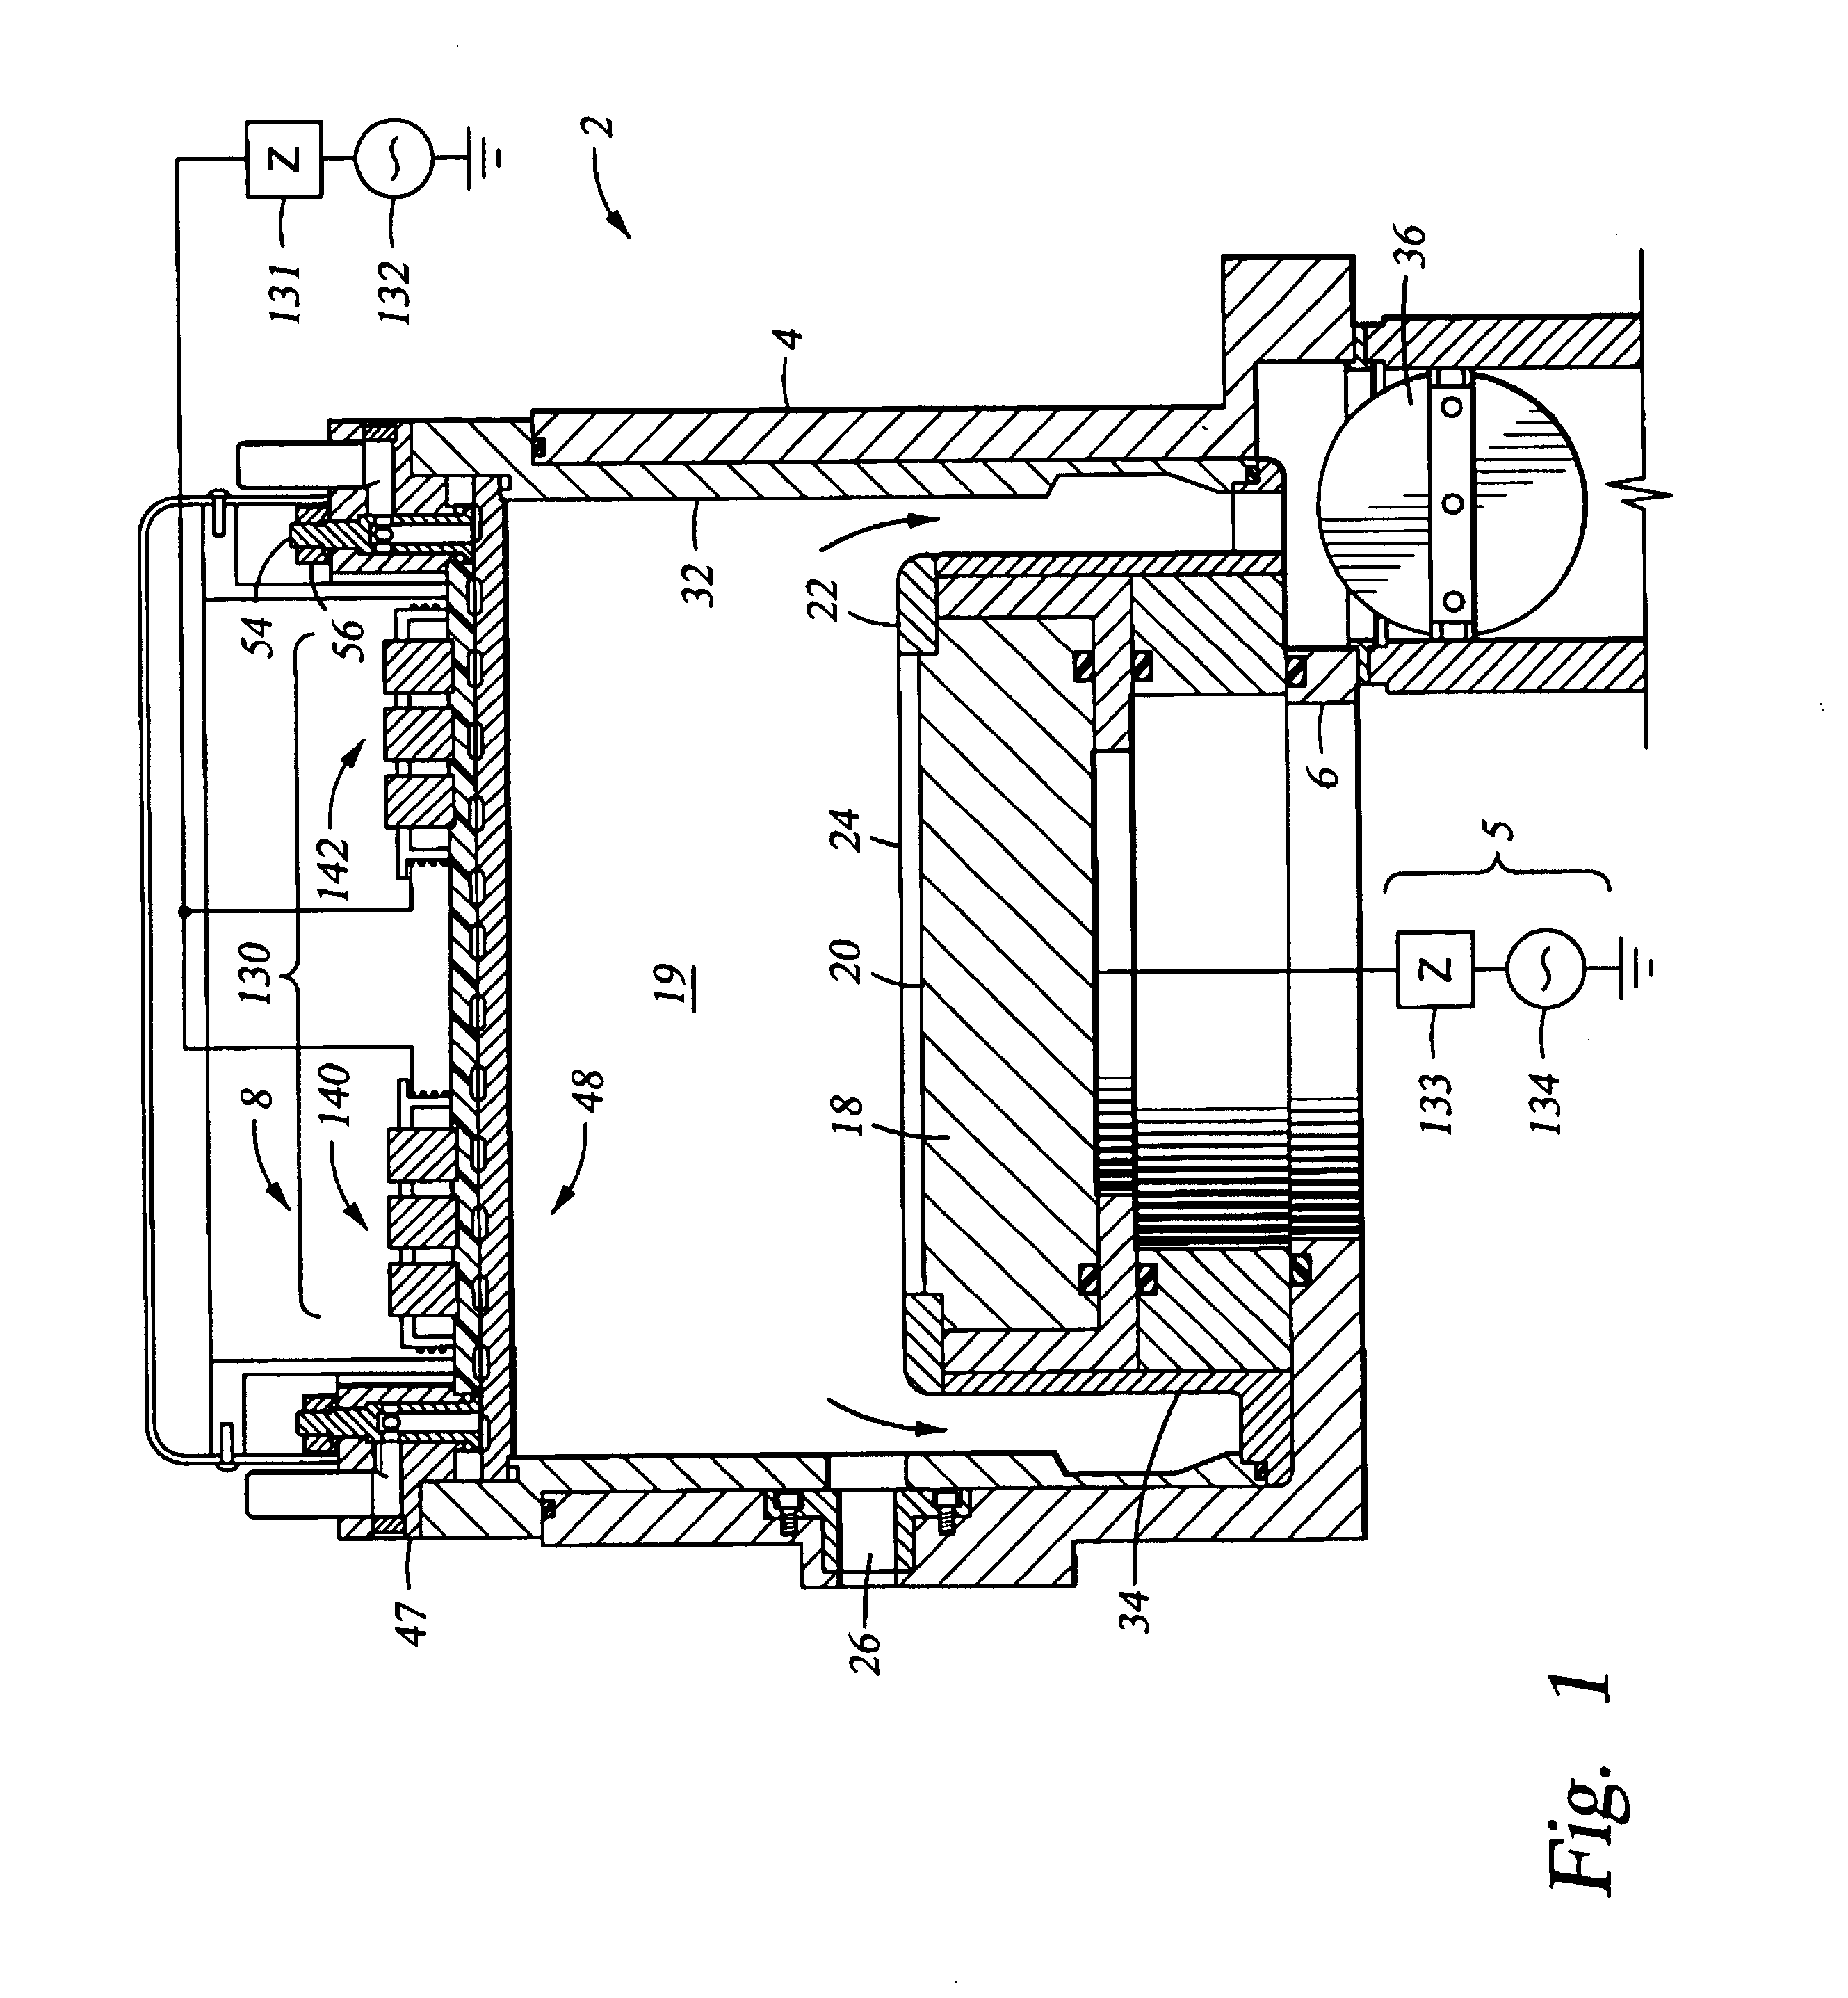 Temperature controlled window with a fluid supply system